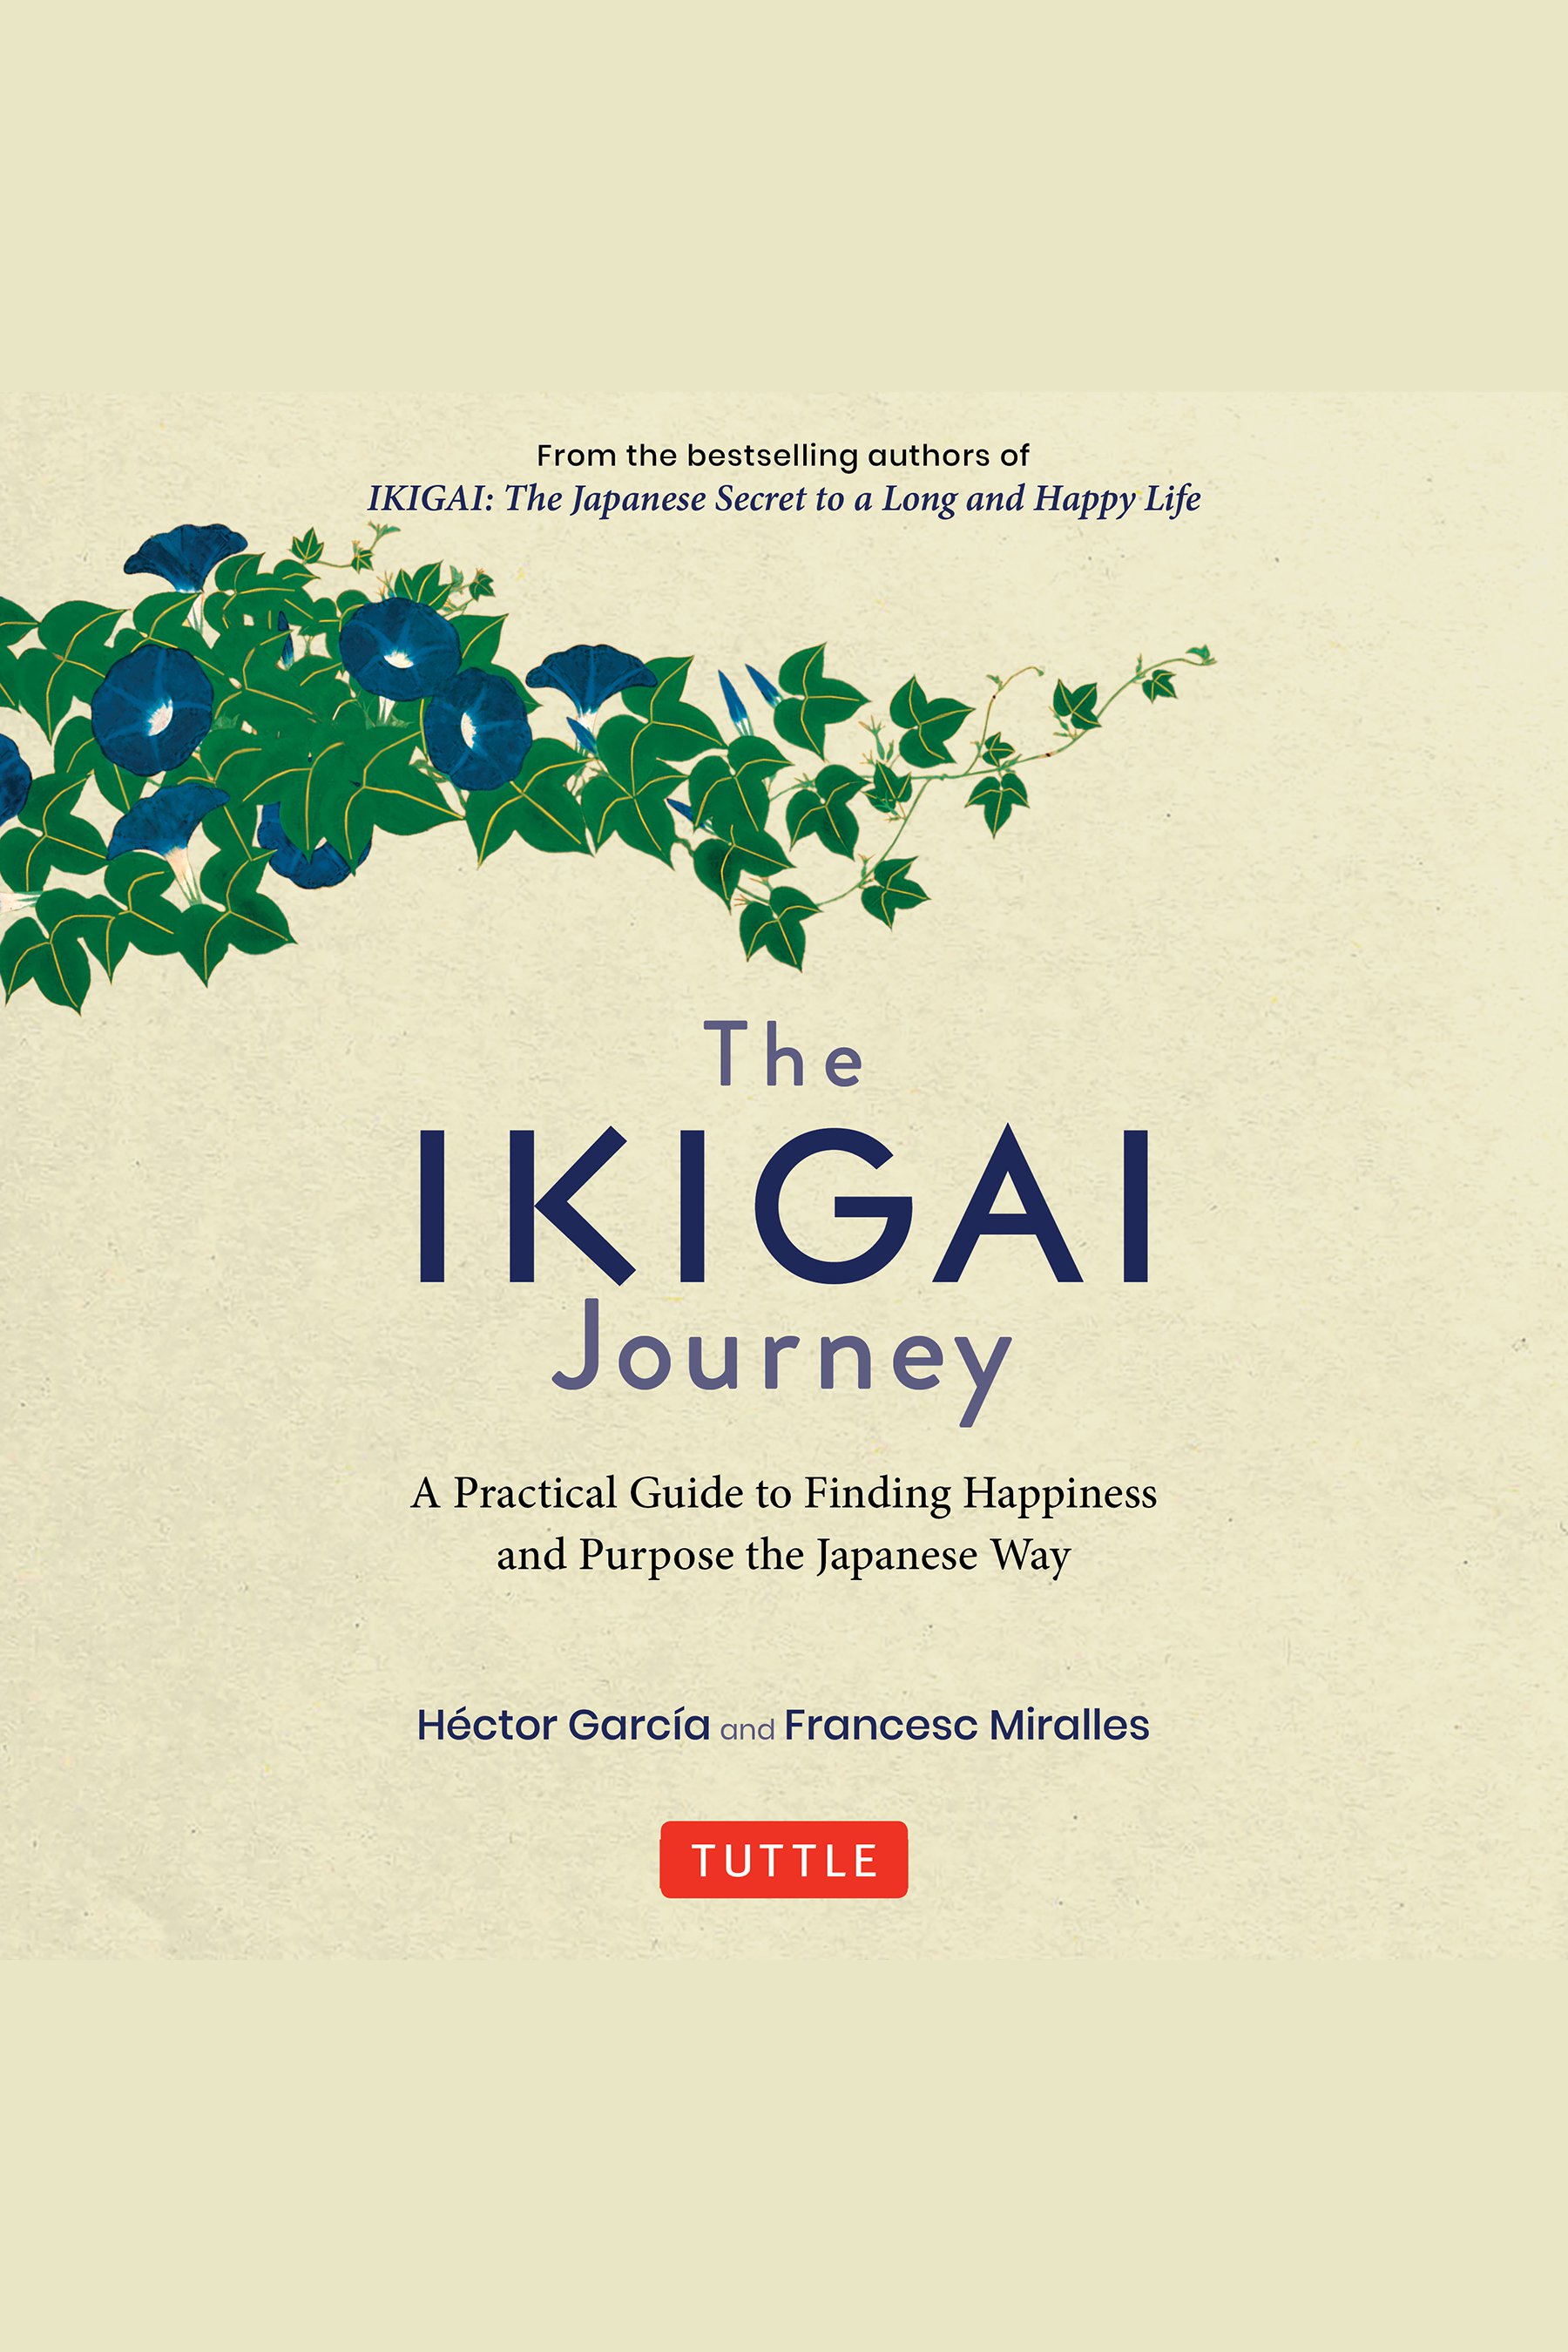 Umschlagbild für Ikigai Journey, The [electronic resource] : A Practical Guide to Finding Happiness and Purpose the Japanese Way